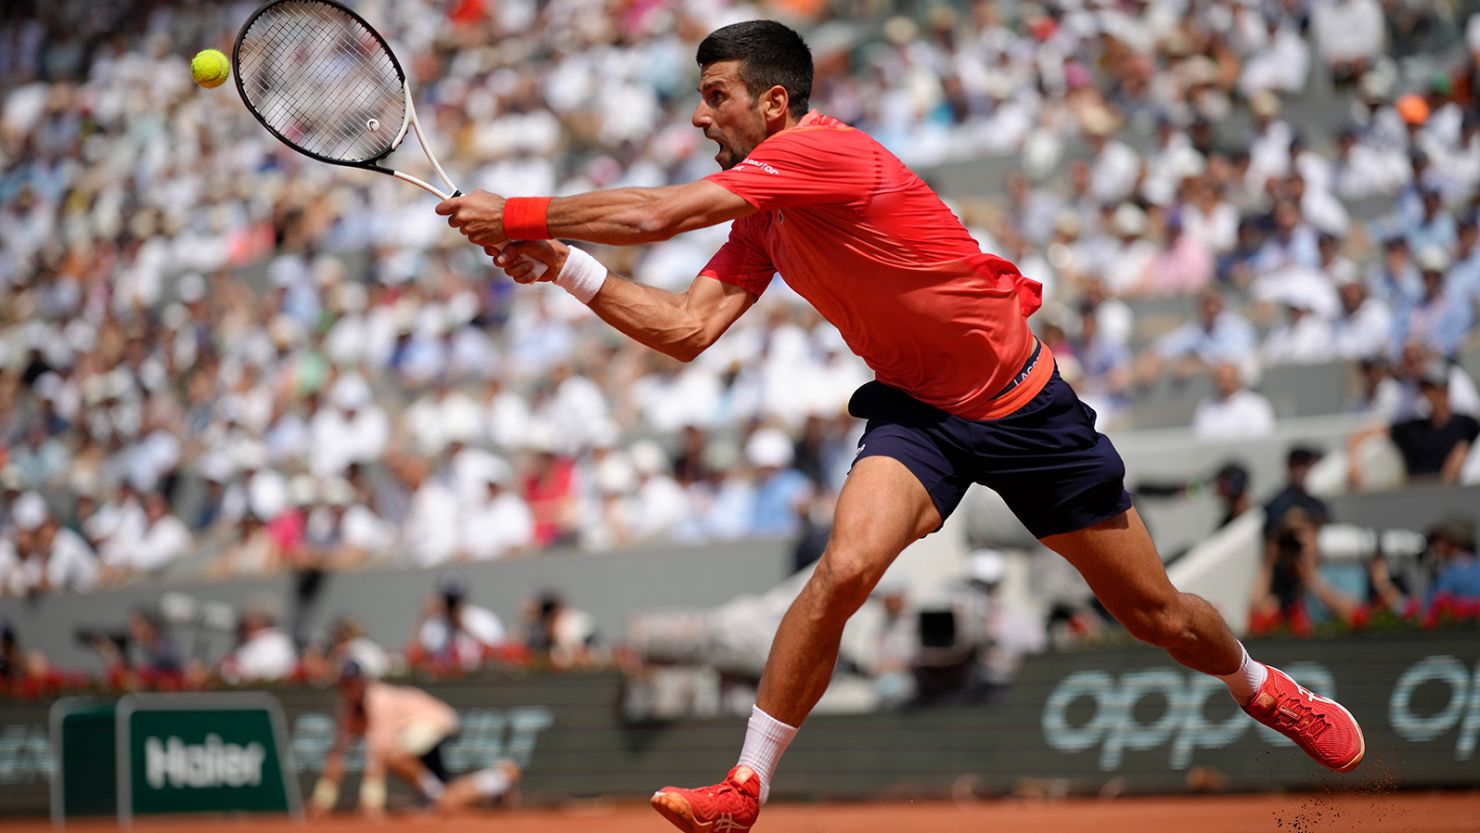 Serbia's Novak Djokovic plays a shot against Spain's Carlos Alcaraz during their semifinal match of the French Open tennis tournament of the French Open tennis tournament at the Roland Garros stadium in Paris, Friday, June 9, 2023. (AP Photo/Christophe Ena)